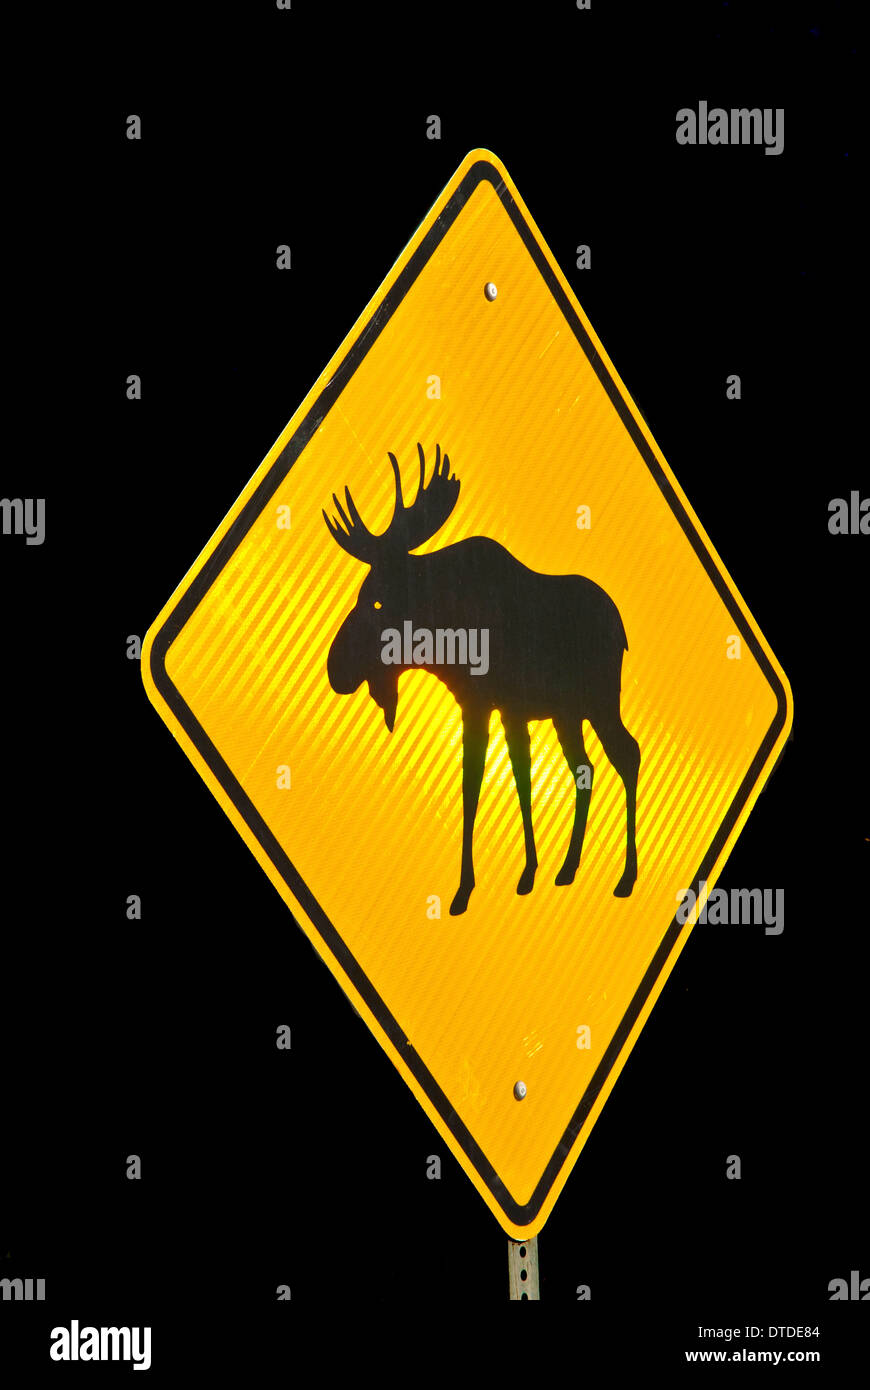 Moose Crossing Road Sign Warning Banque D'Images